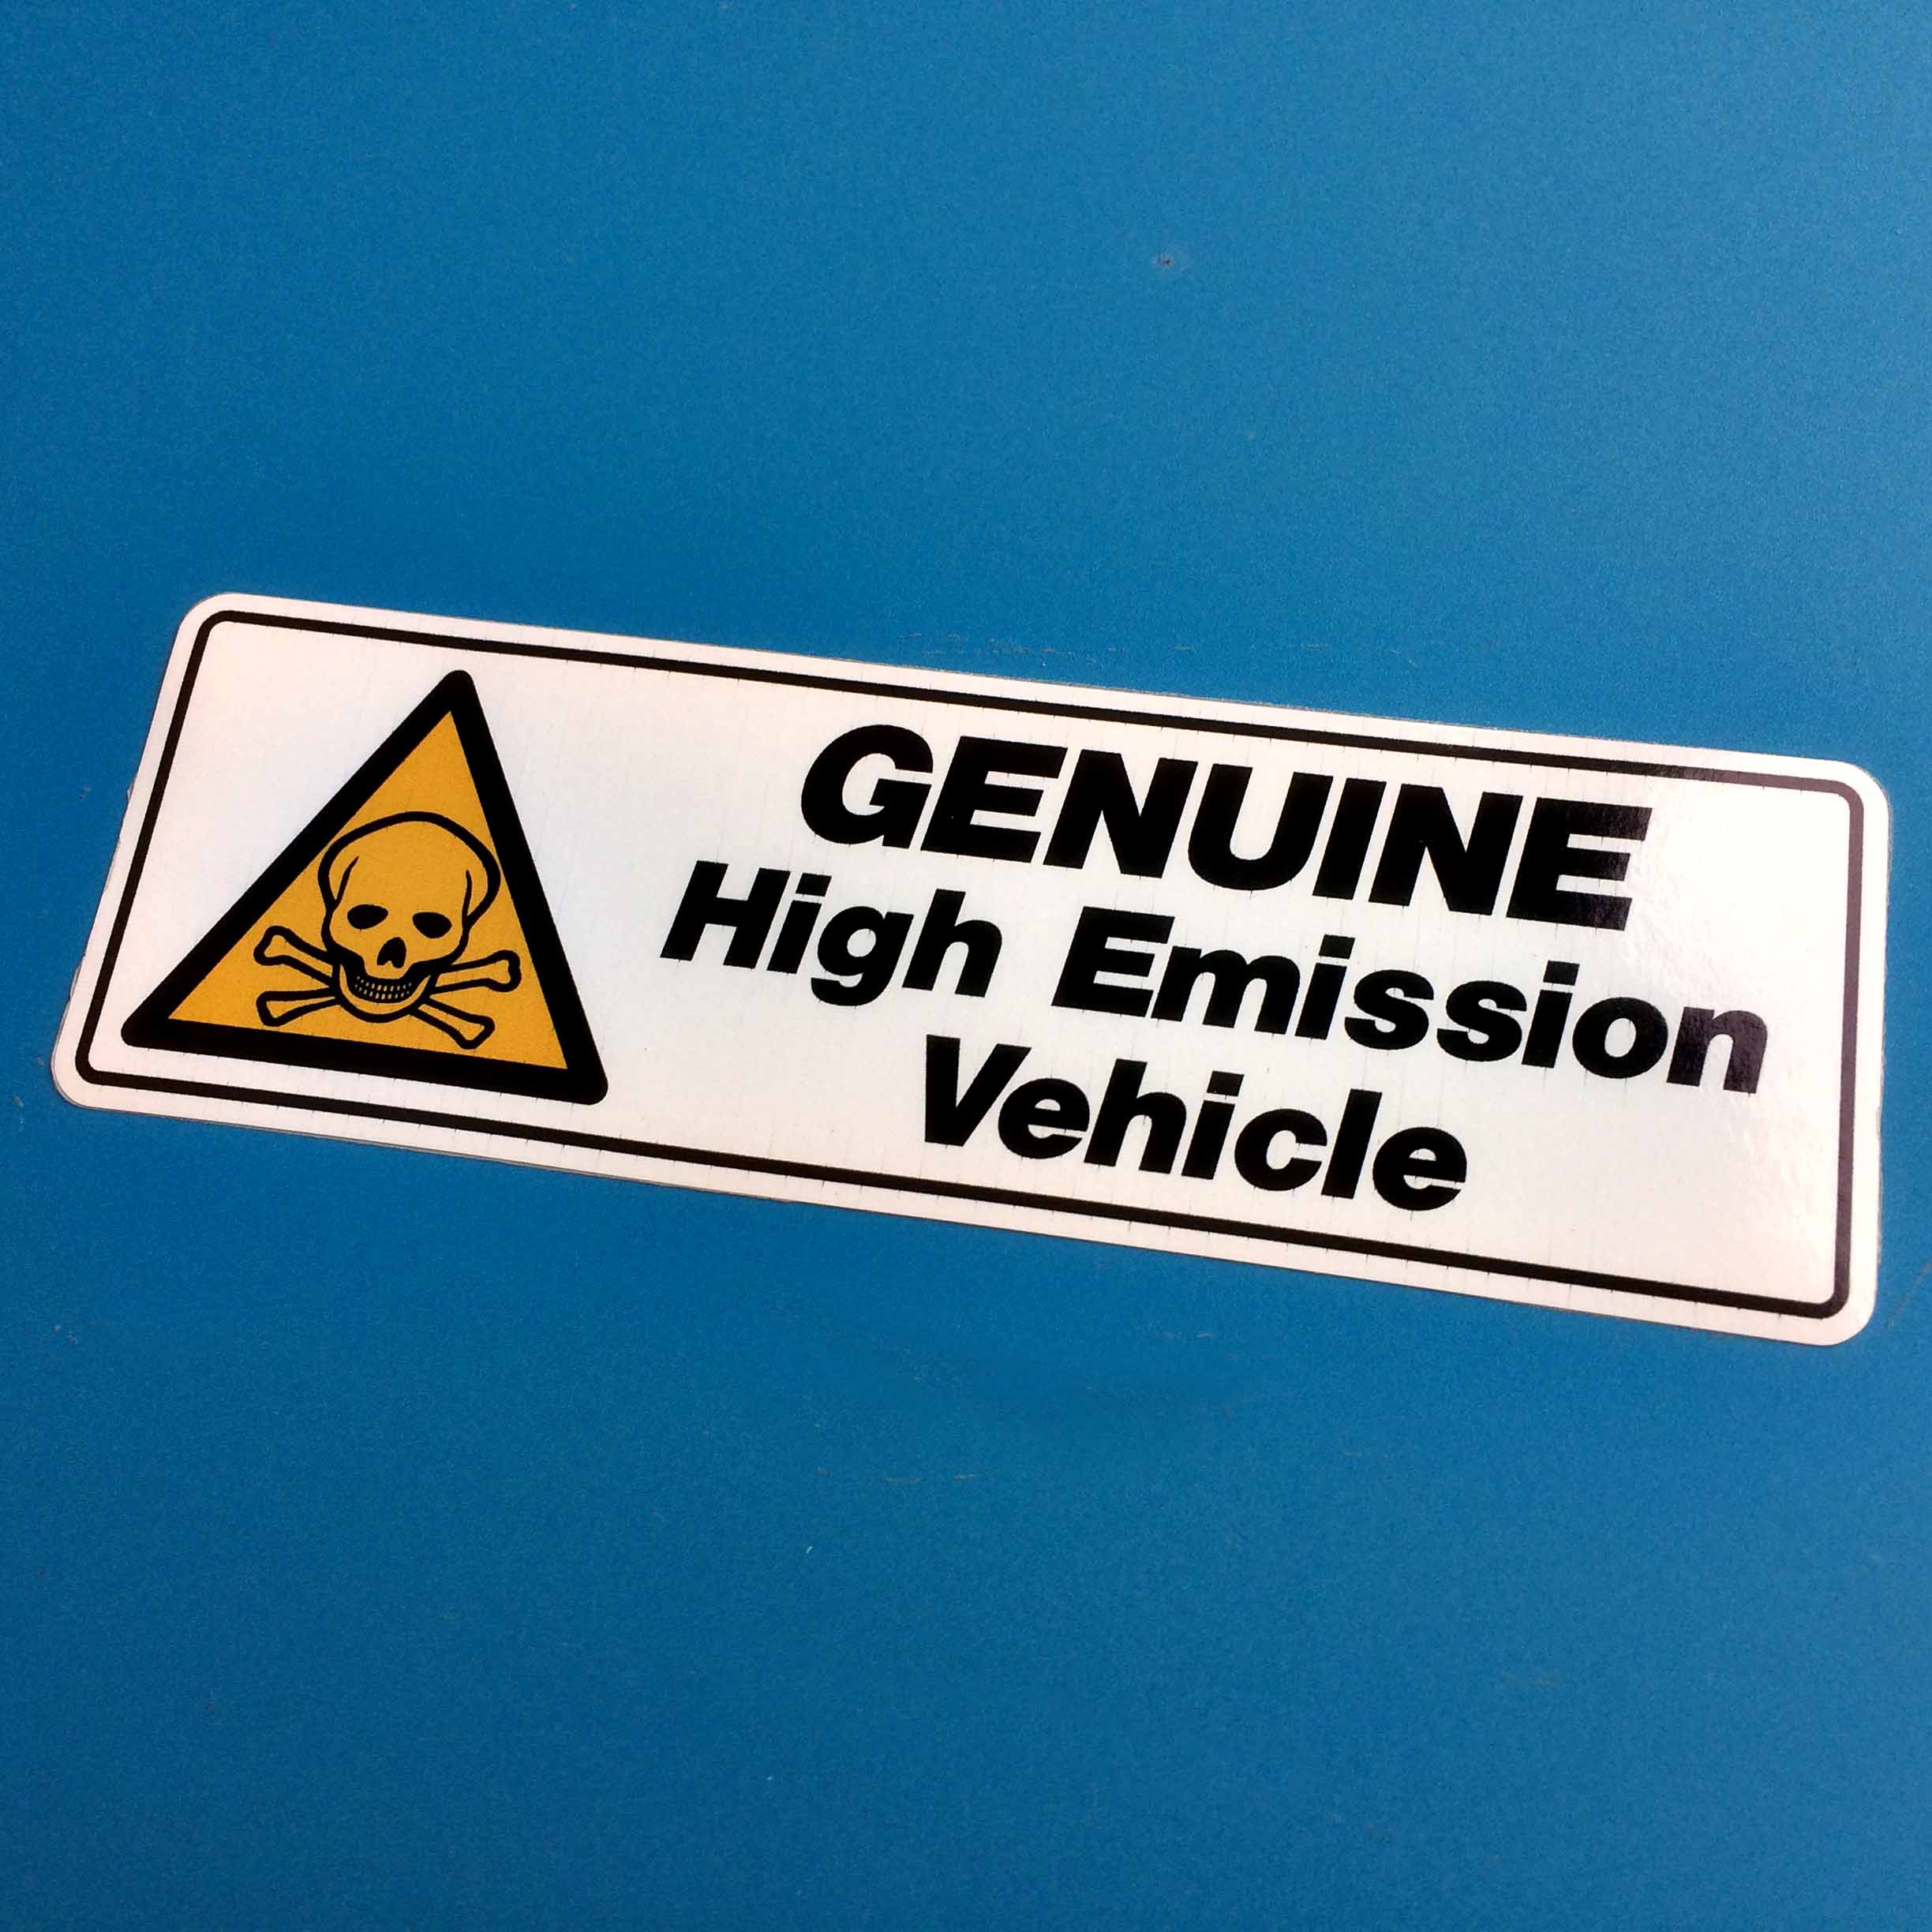 Genuine High Emission Vehicle in black lettering on a white background bordered in black next to a skull and crossbones hazard triangle in yellow and black.